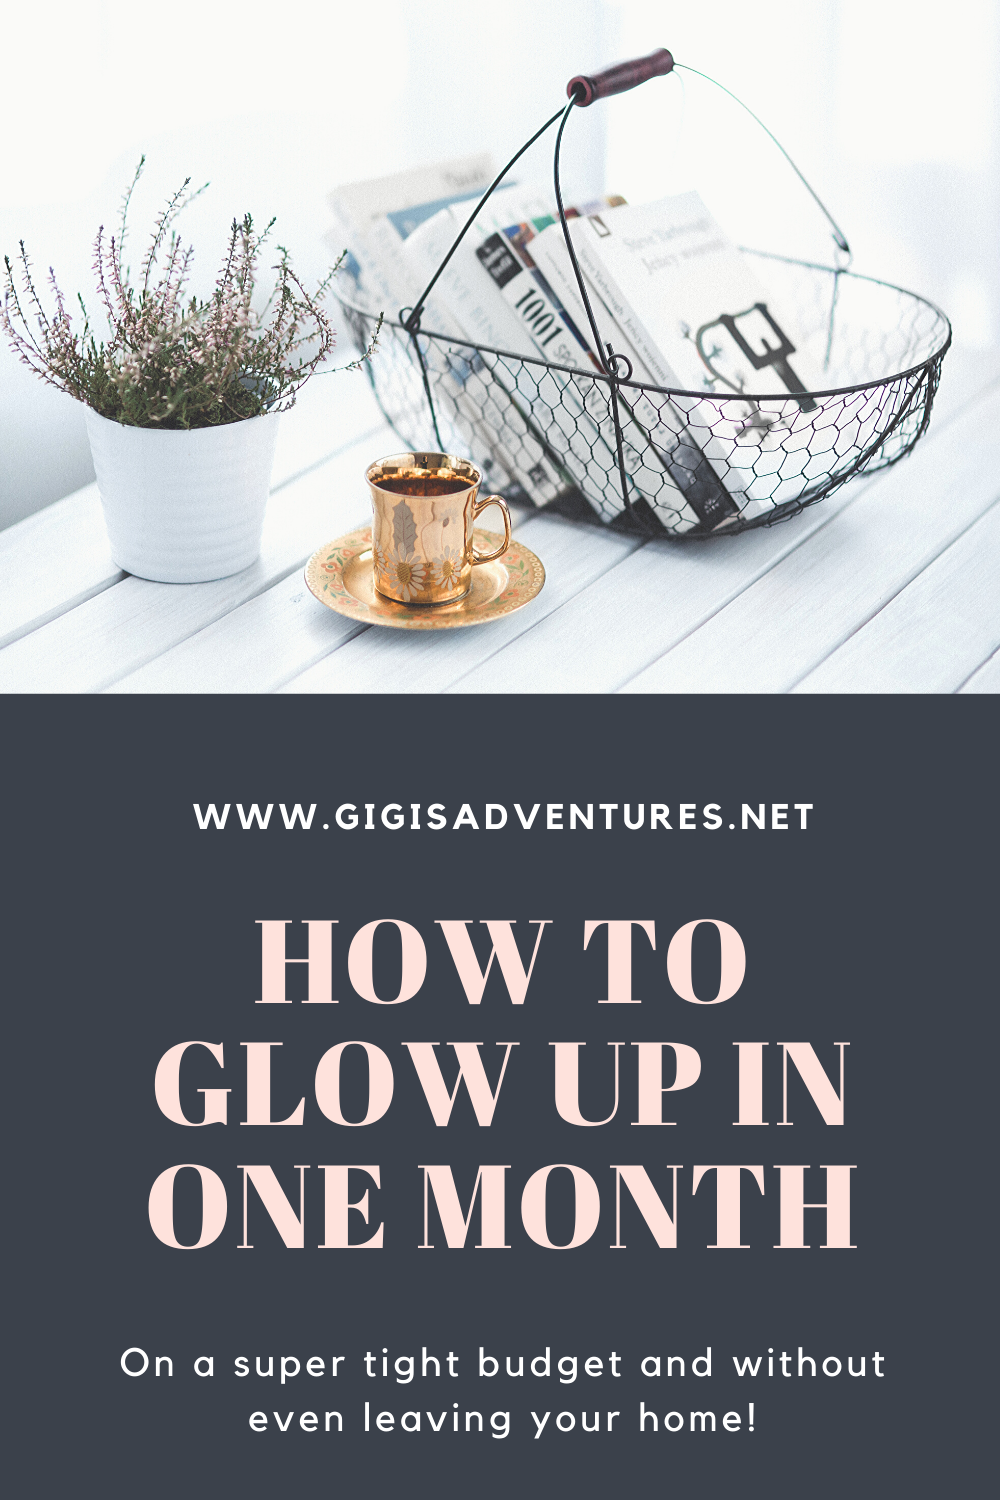 How To Glow Up in 1 Month - On a Super Tight Budget!